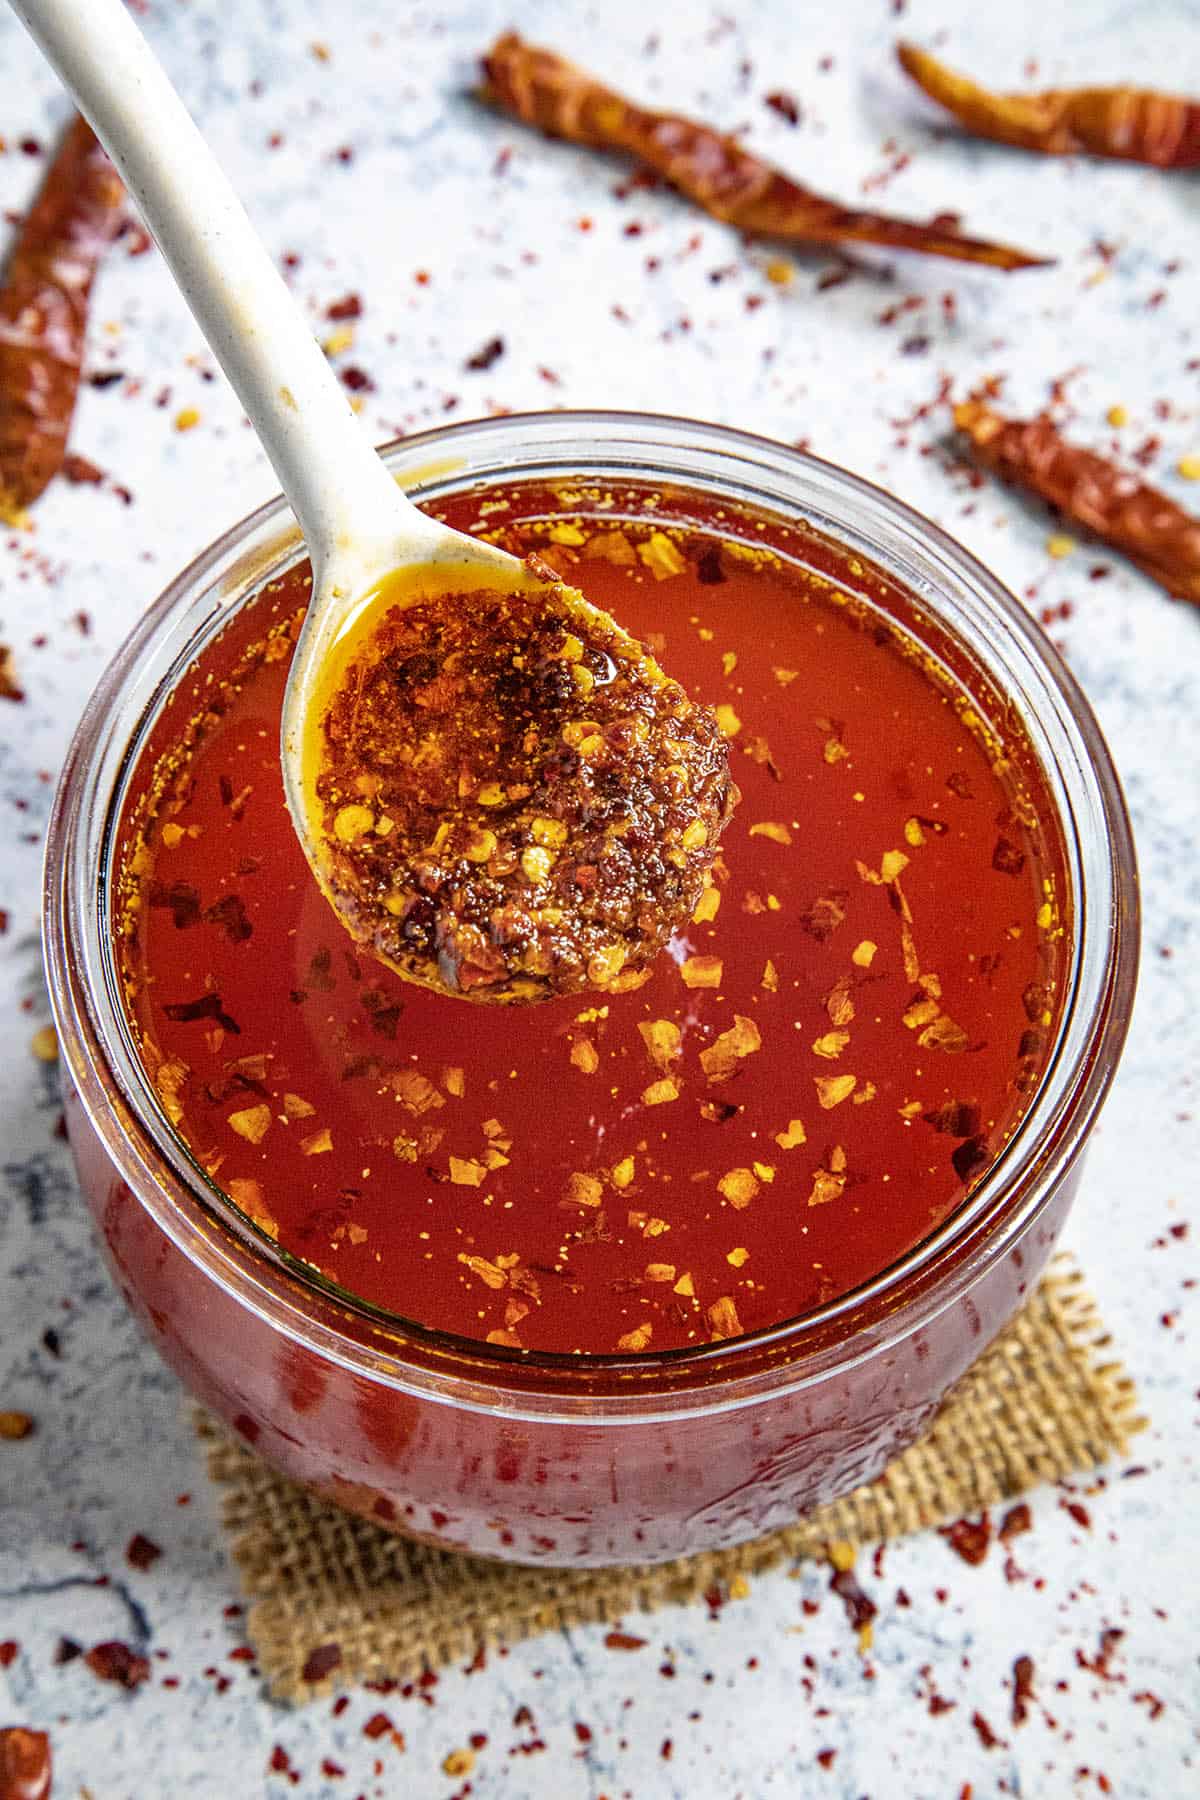 The thick sludge of chili flakes and spices from the bottom of the homemade chili oil jar